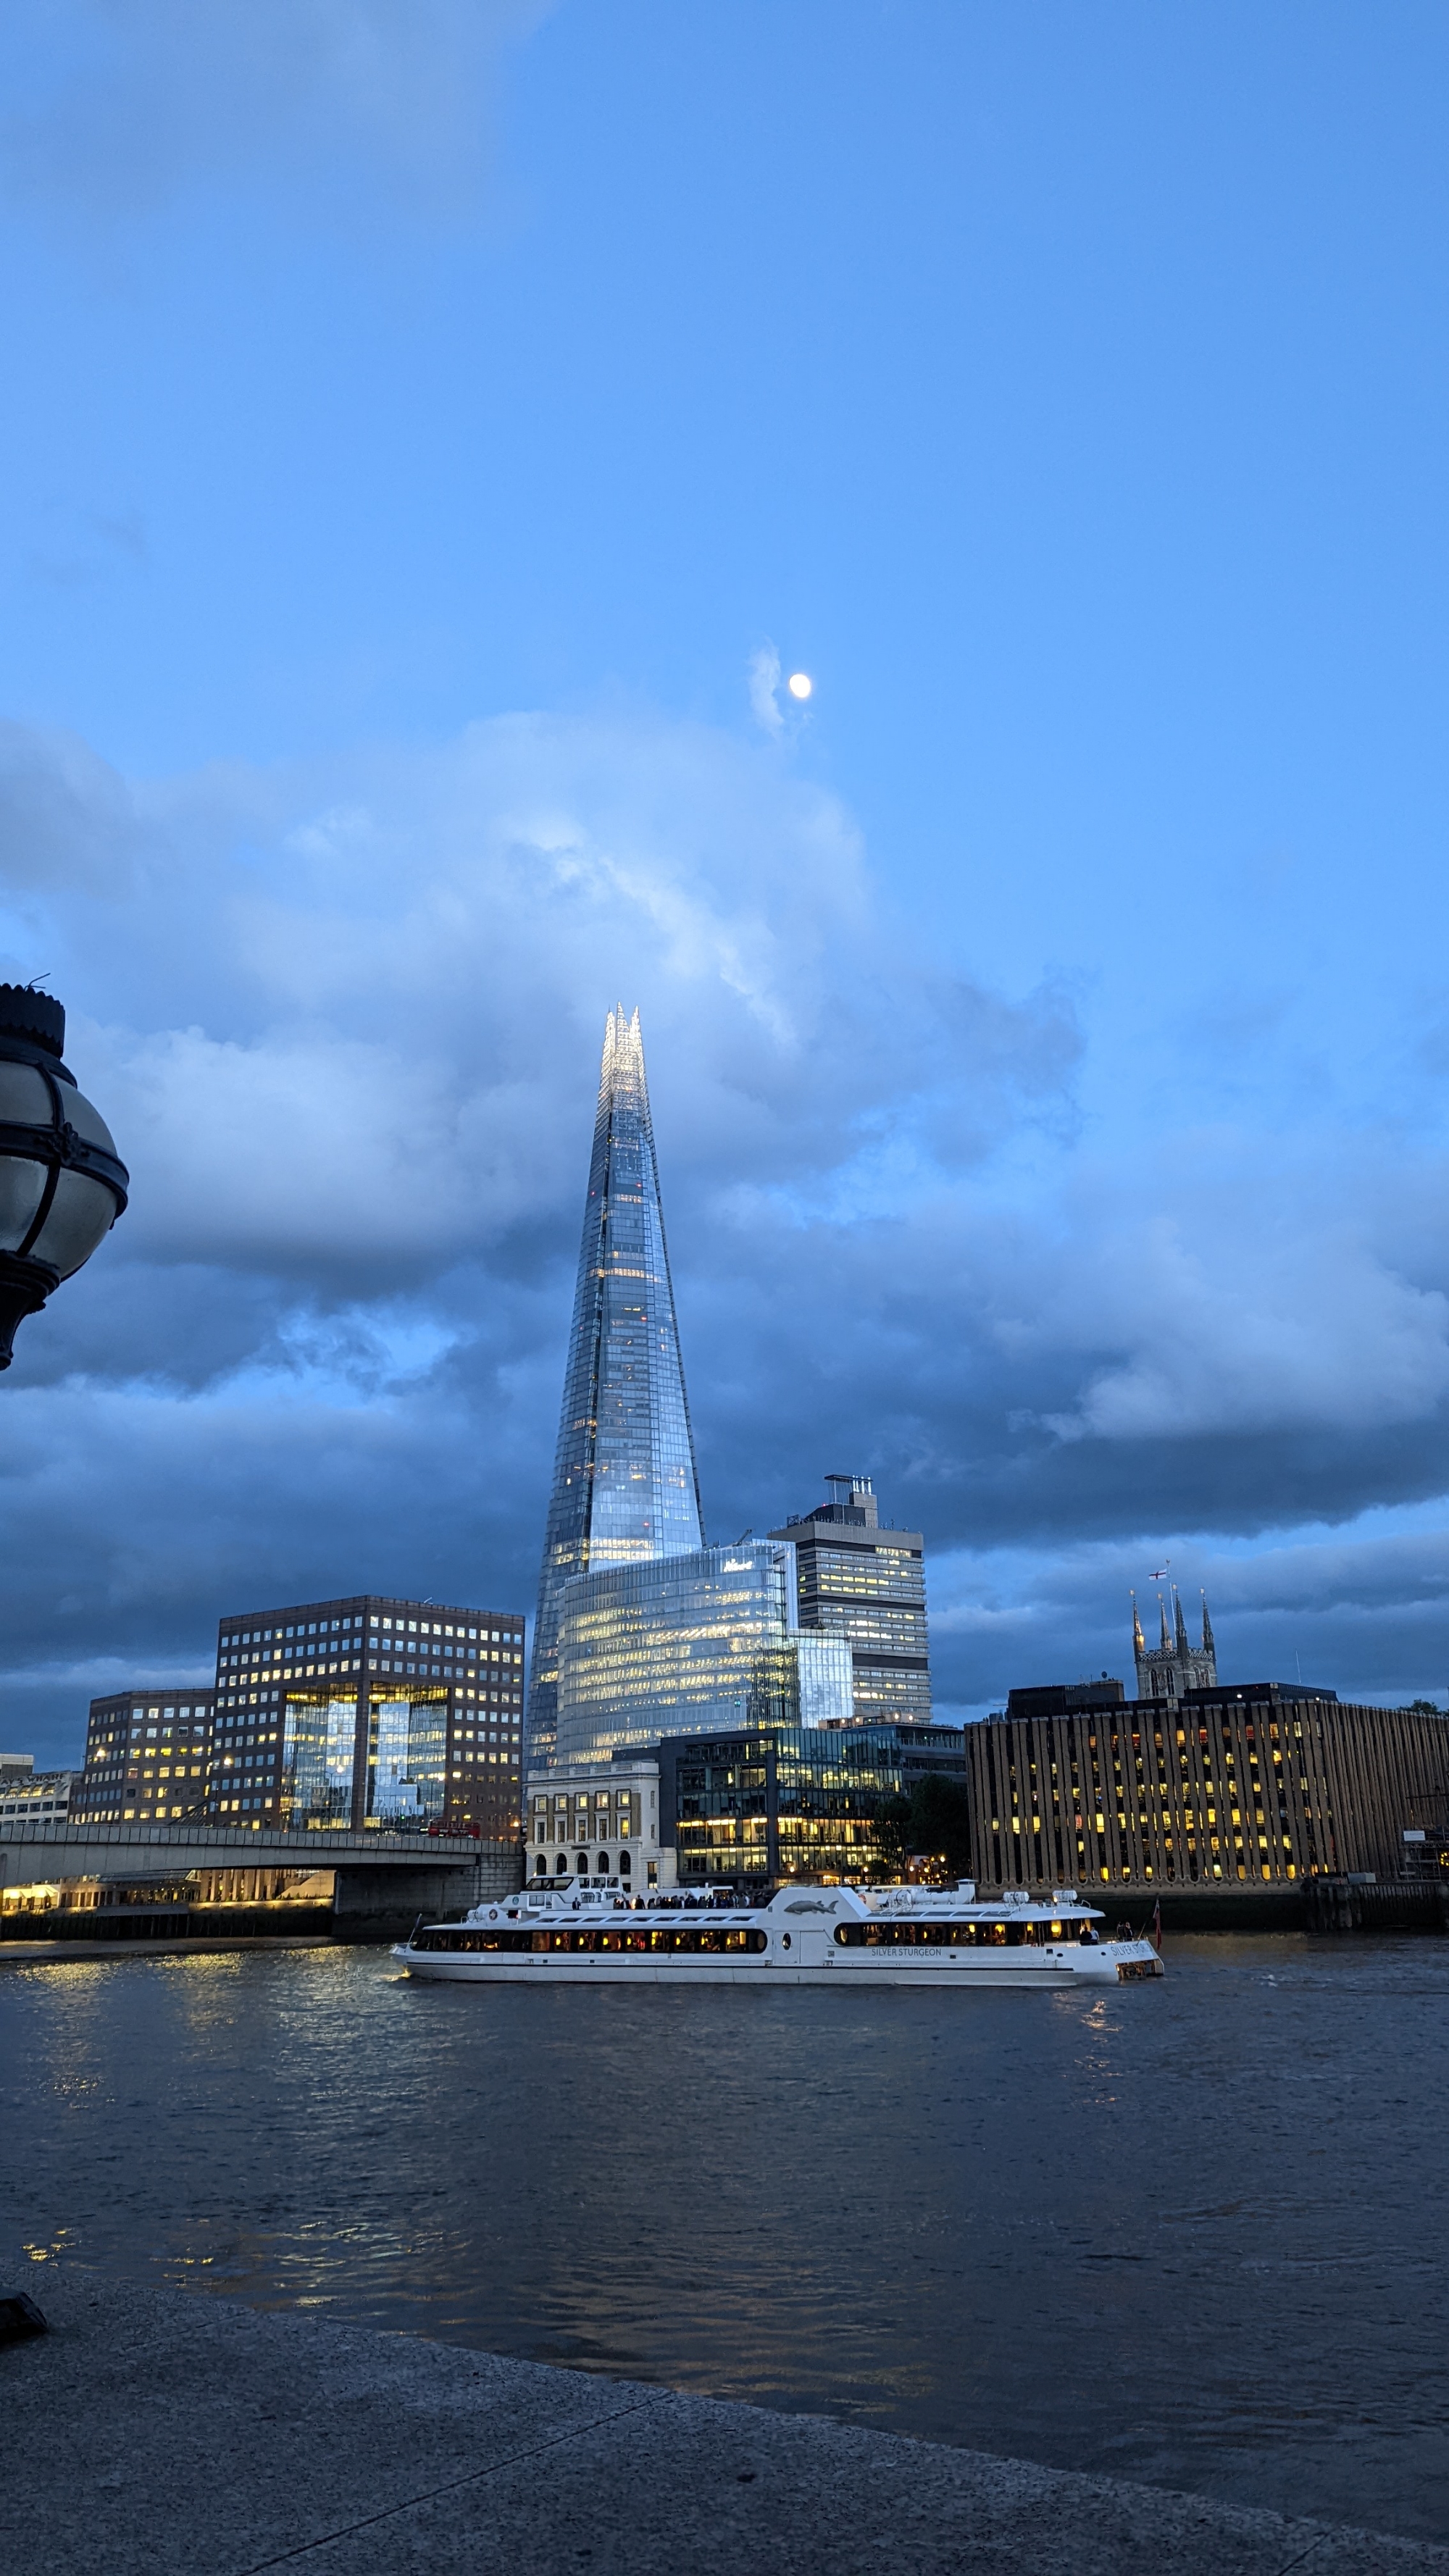 A late evening view of The Shard with clouds above it and just peeking out is the moon, brightly shining. It's a lovely bright photo despite being shot so late in the evening, and a sign of the lovely summer evenings